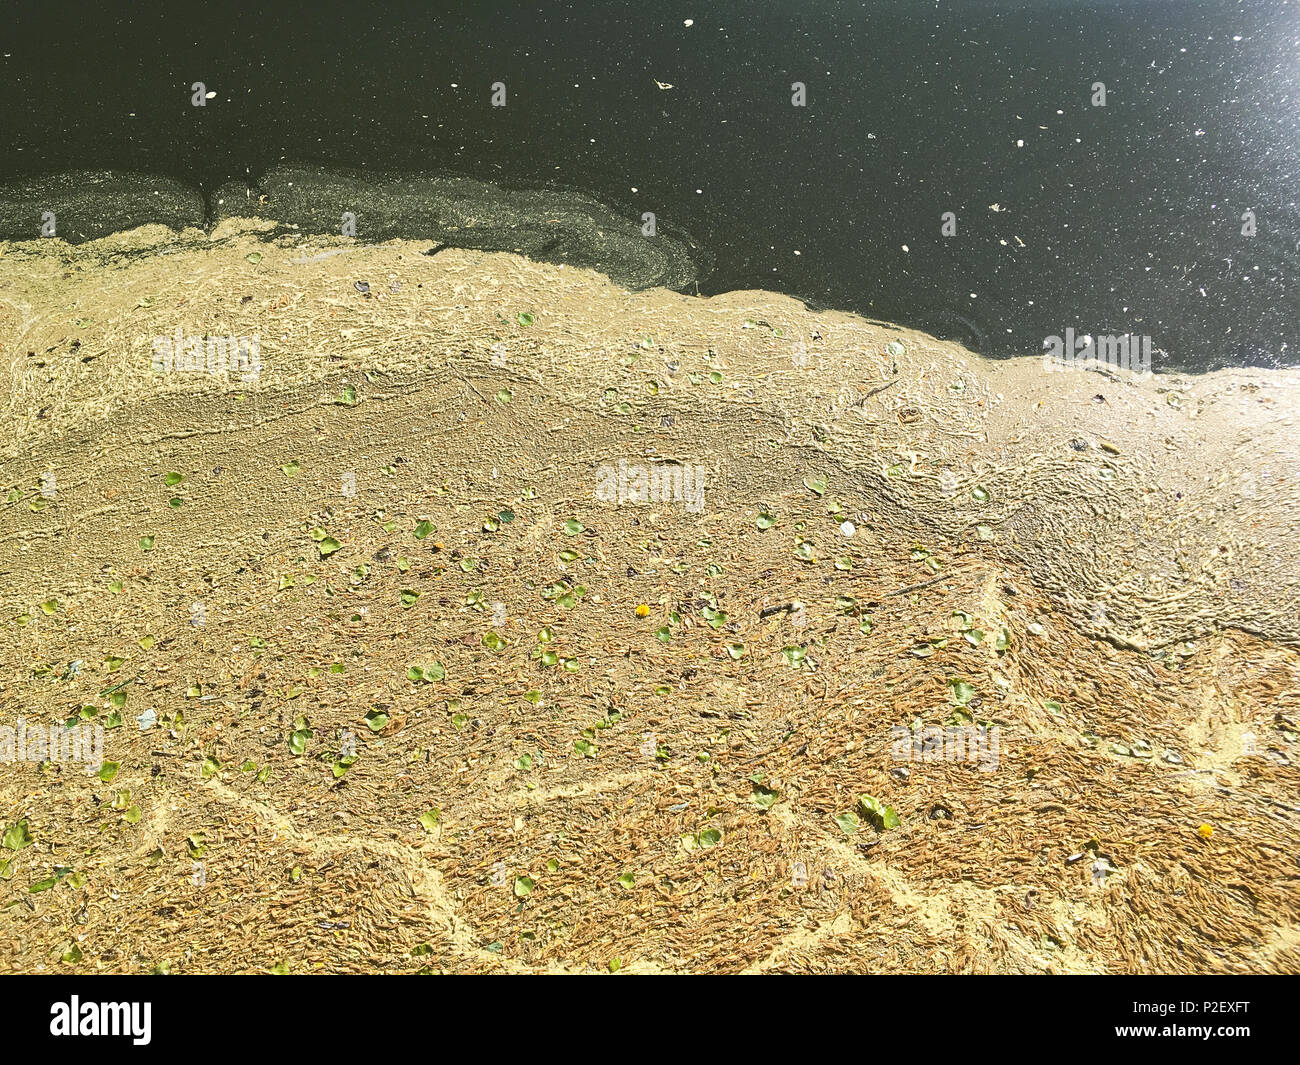 stagnant polluted water with scum and waste on surface. environment damage. Stock Photo